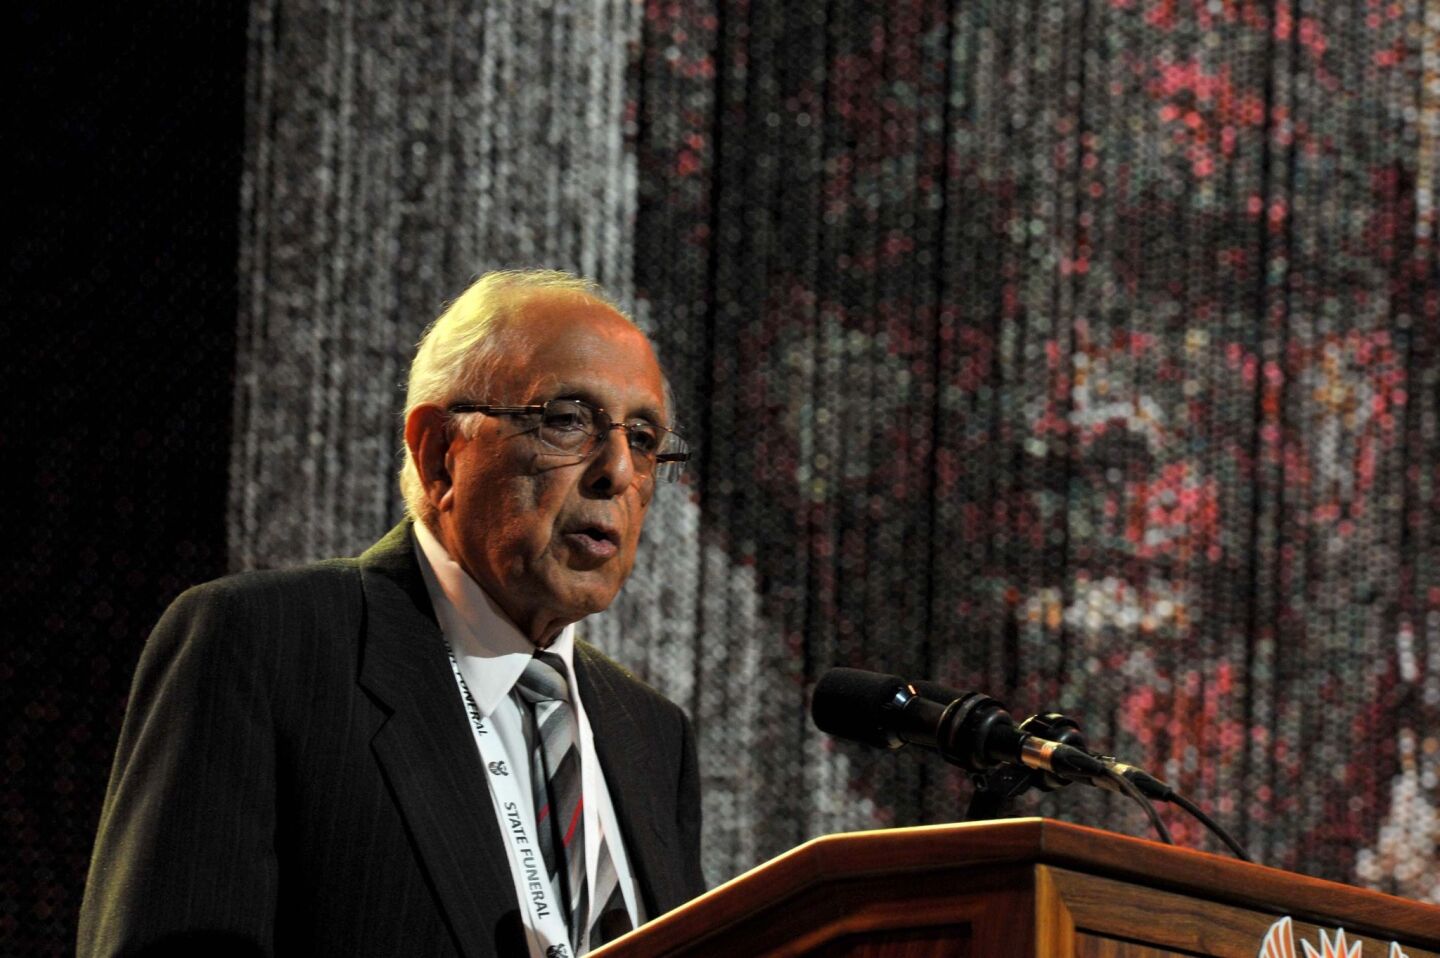 A close confidante of Nelson Mandela, Kathrada dedicated his life to opposing apartheid and racism. An African National Congress activist, he played a major role in South Africa’s liberation struggle. He was 87. Full obituary